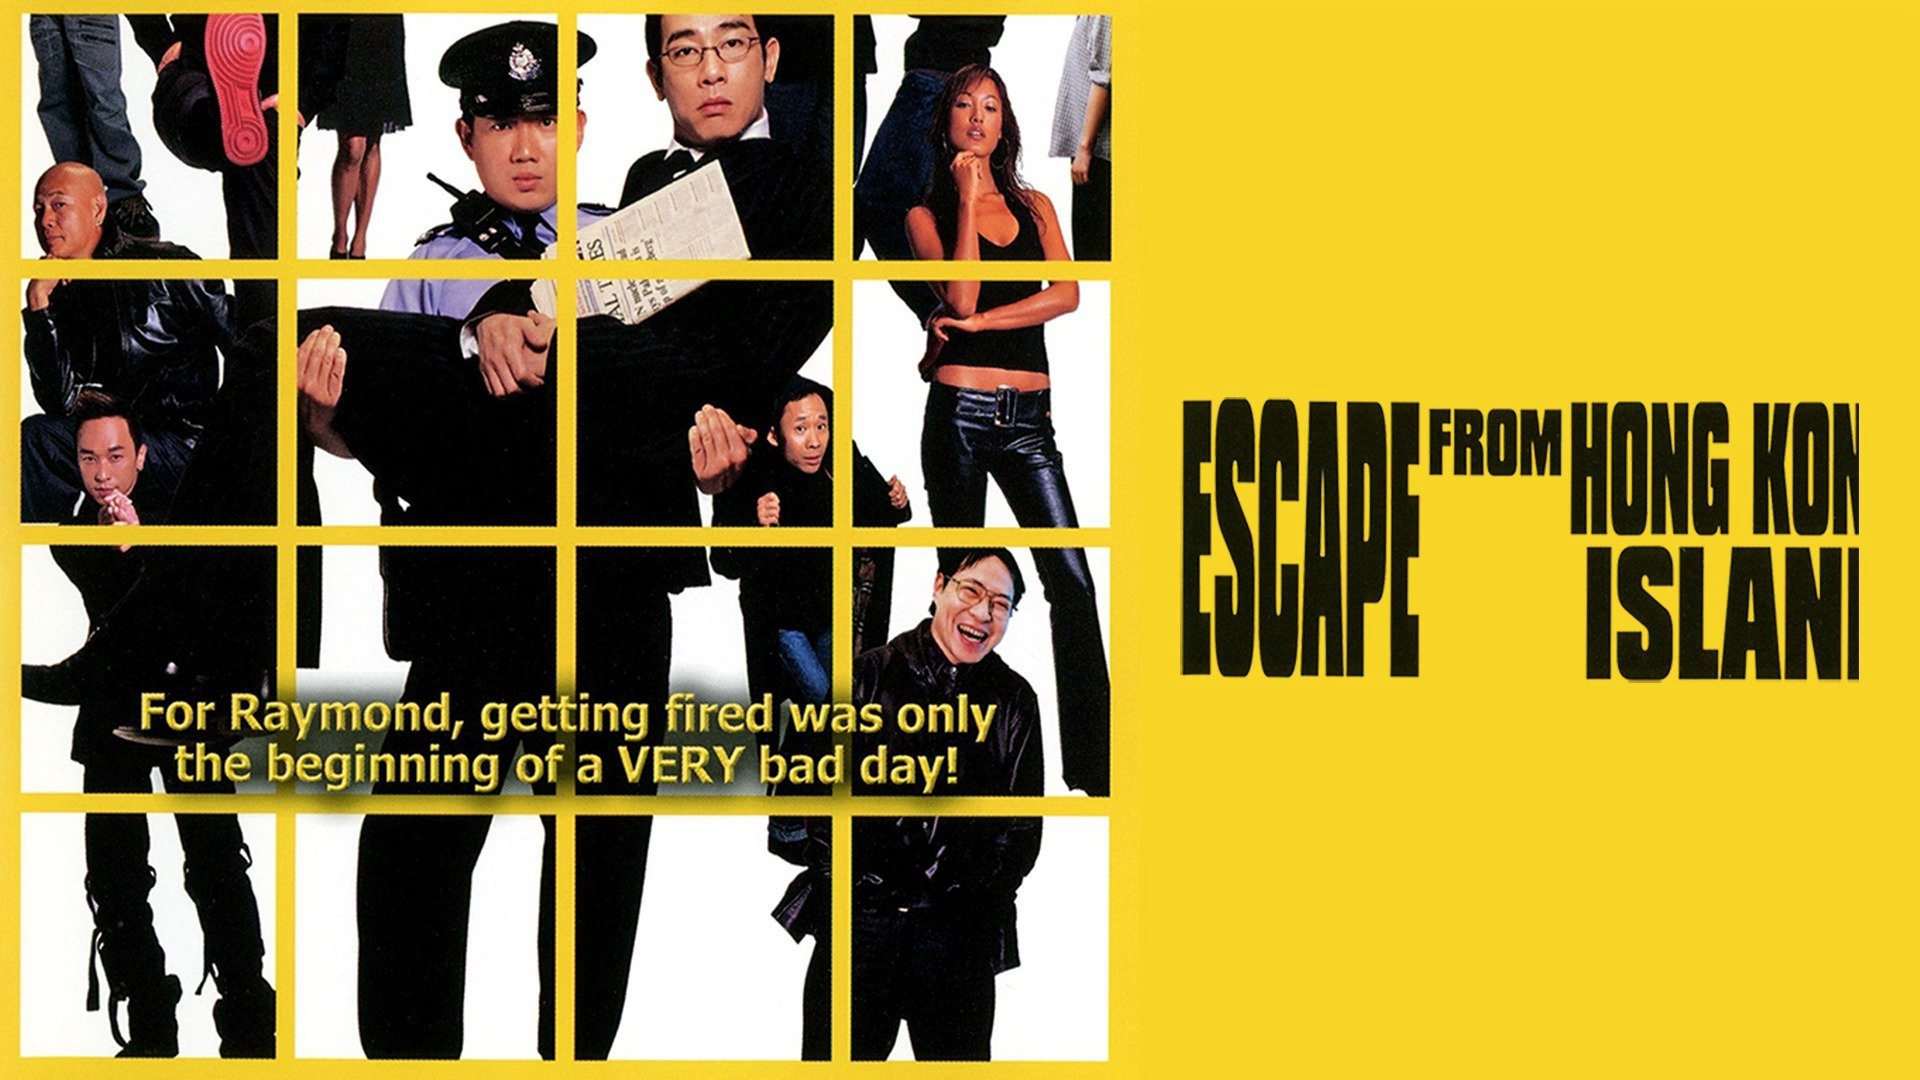 Banner Phim Escape from Hong Kong island (Escape from Hong Kong Island)